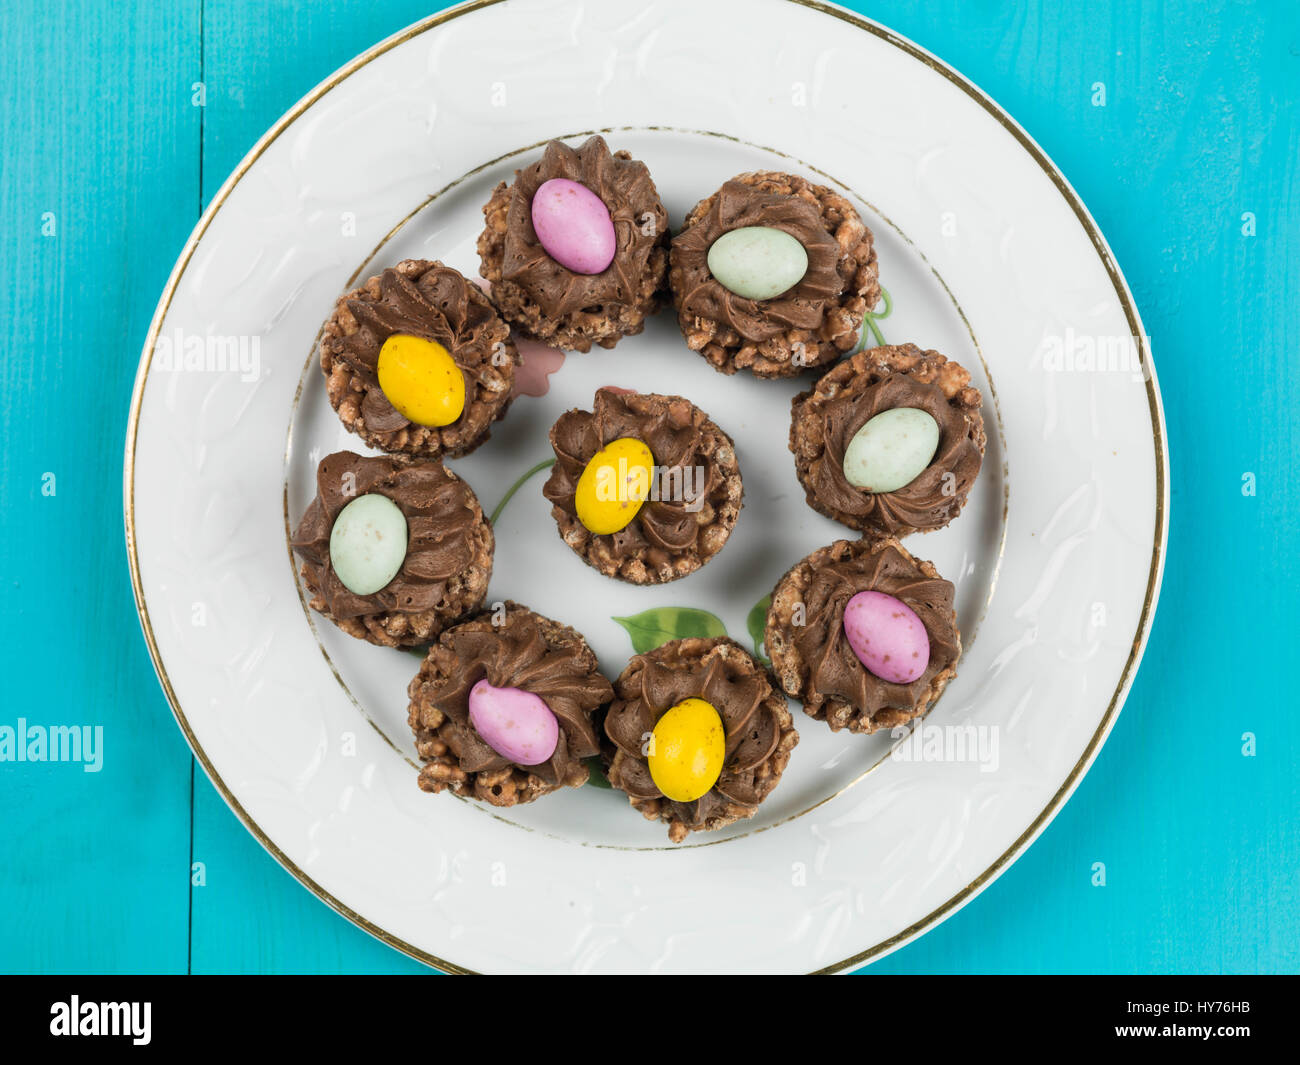 Easter Chocolate Crispy Cereal Nests With Mini Easter Eggs Against a Blue Background Stock Photo